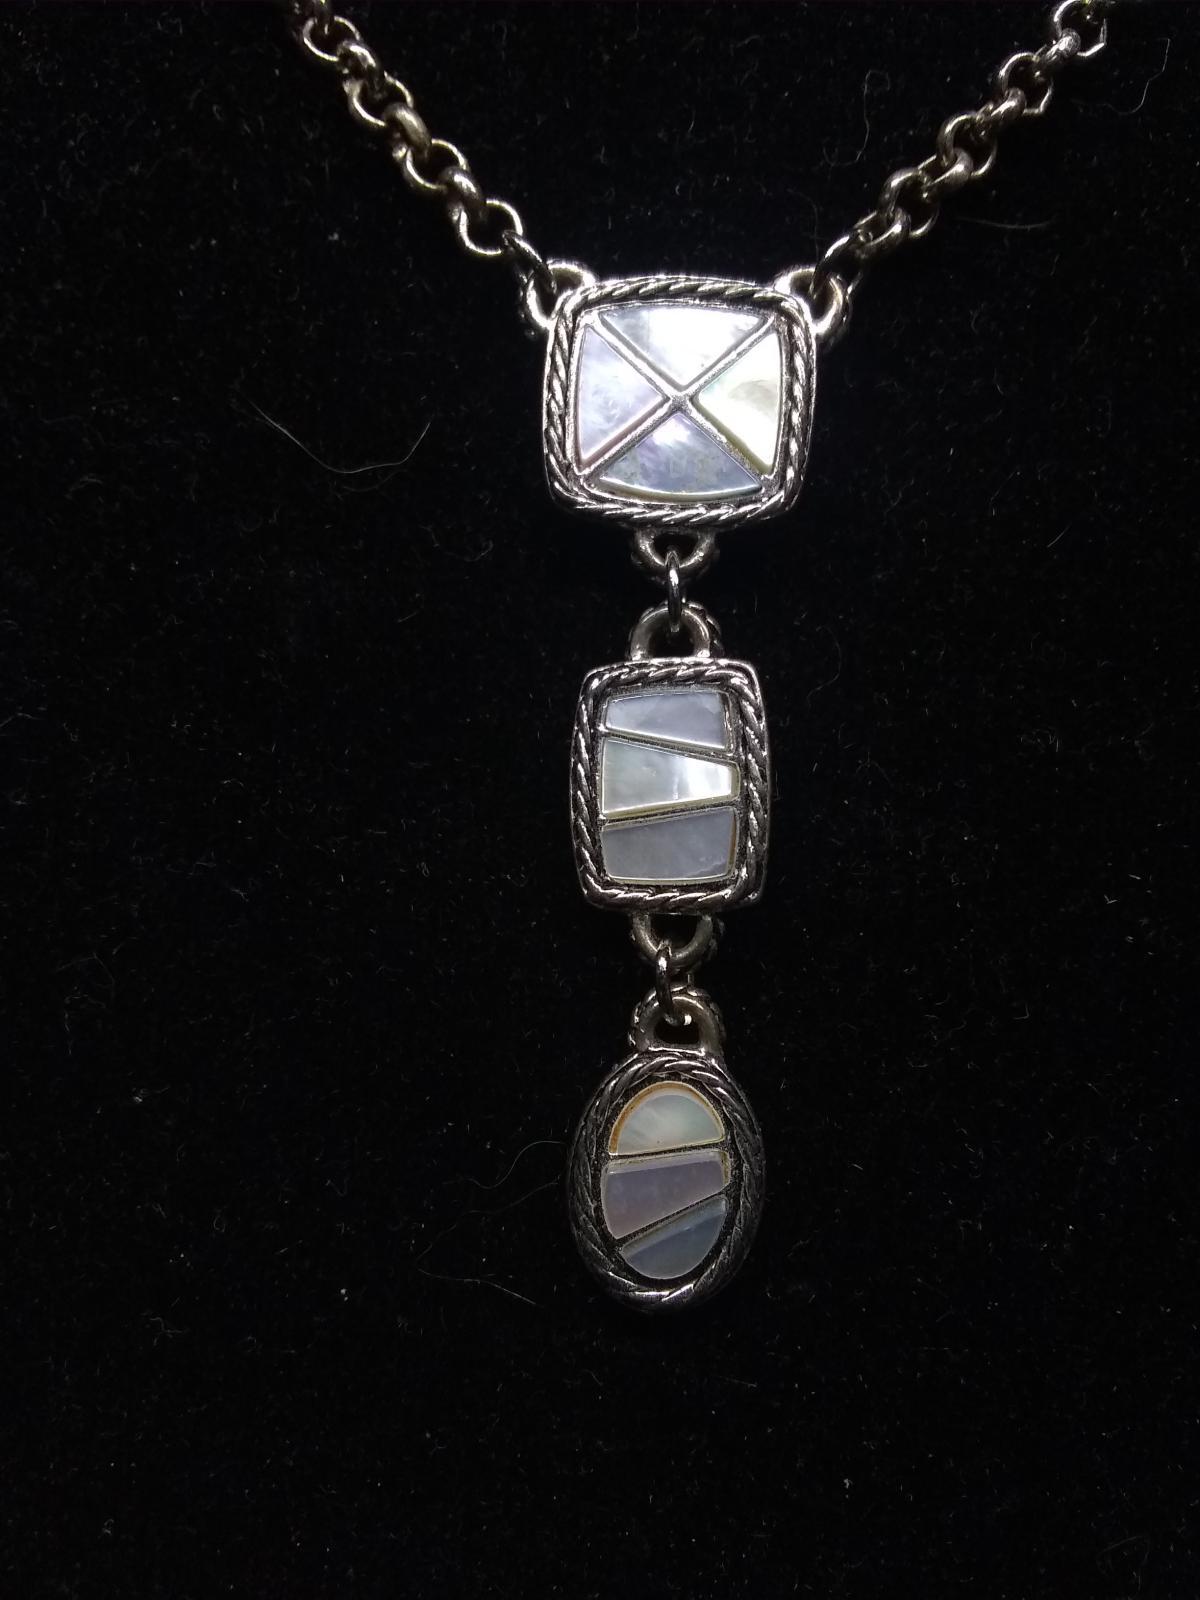 Costume Jewelry-Necklace with 3 Section Polished Stone Pendant